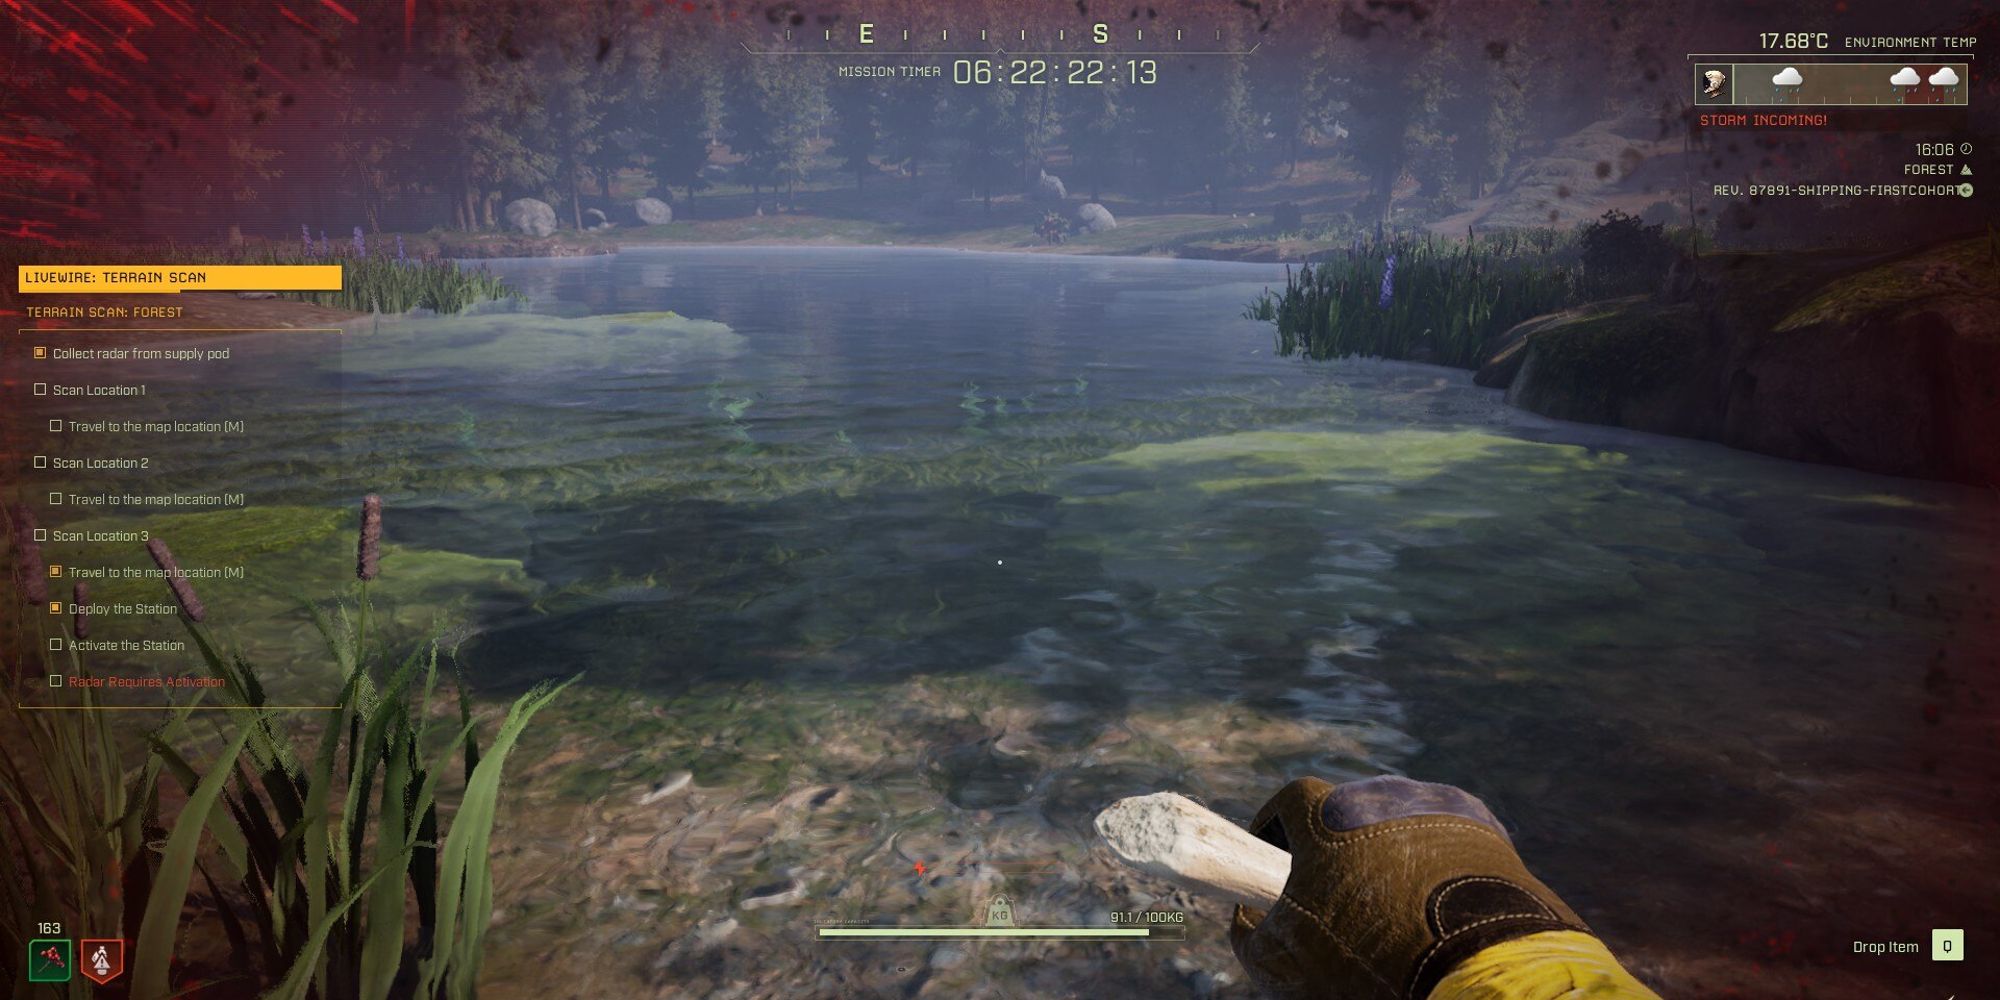 player near death entering water